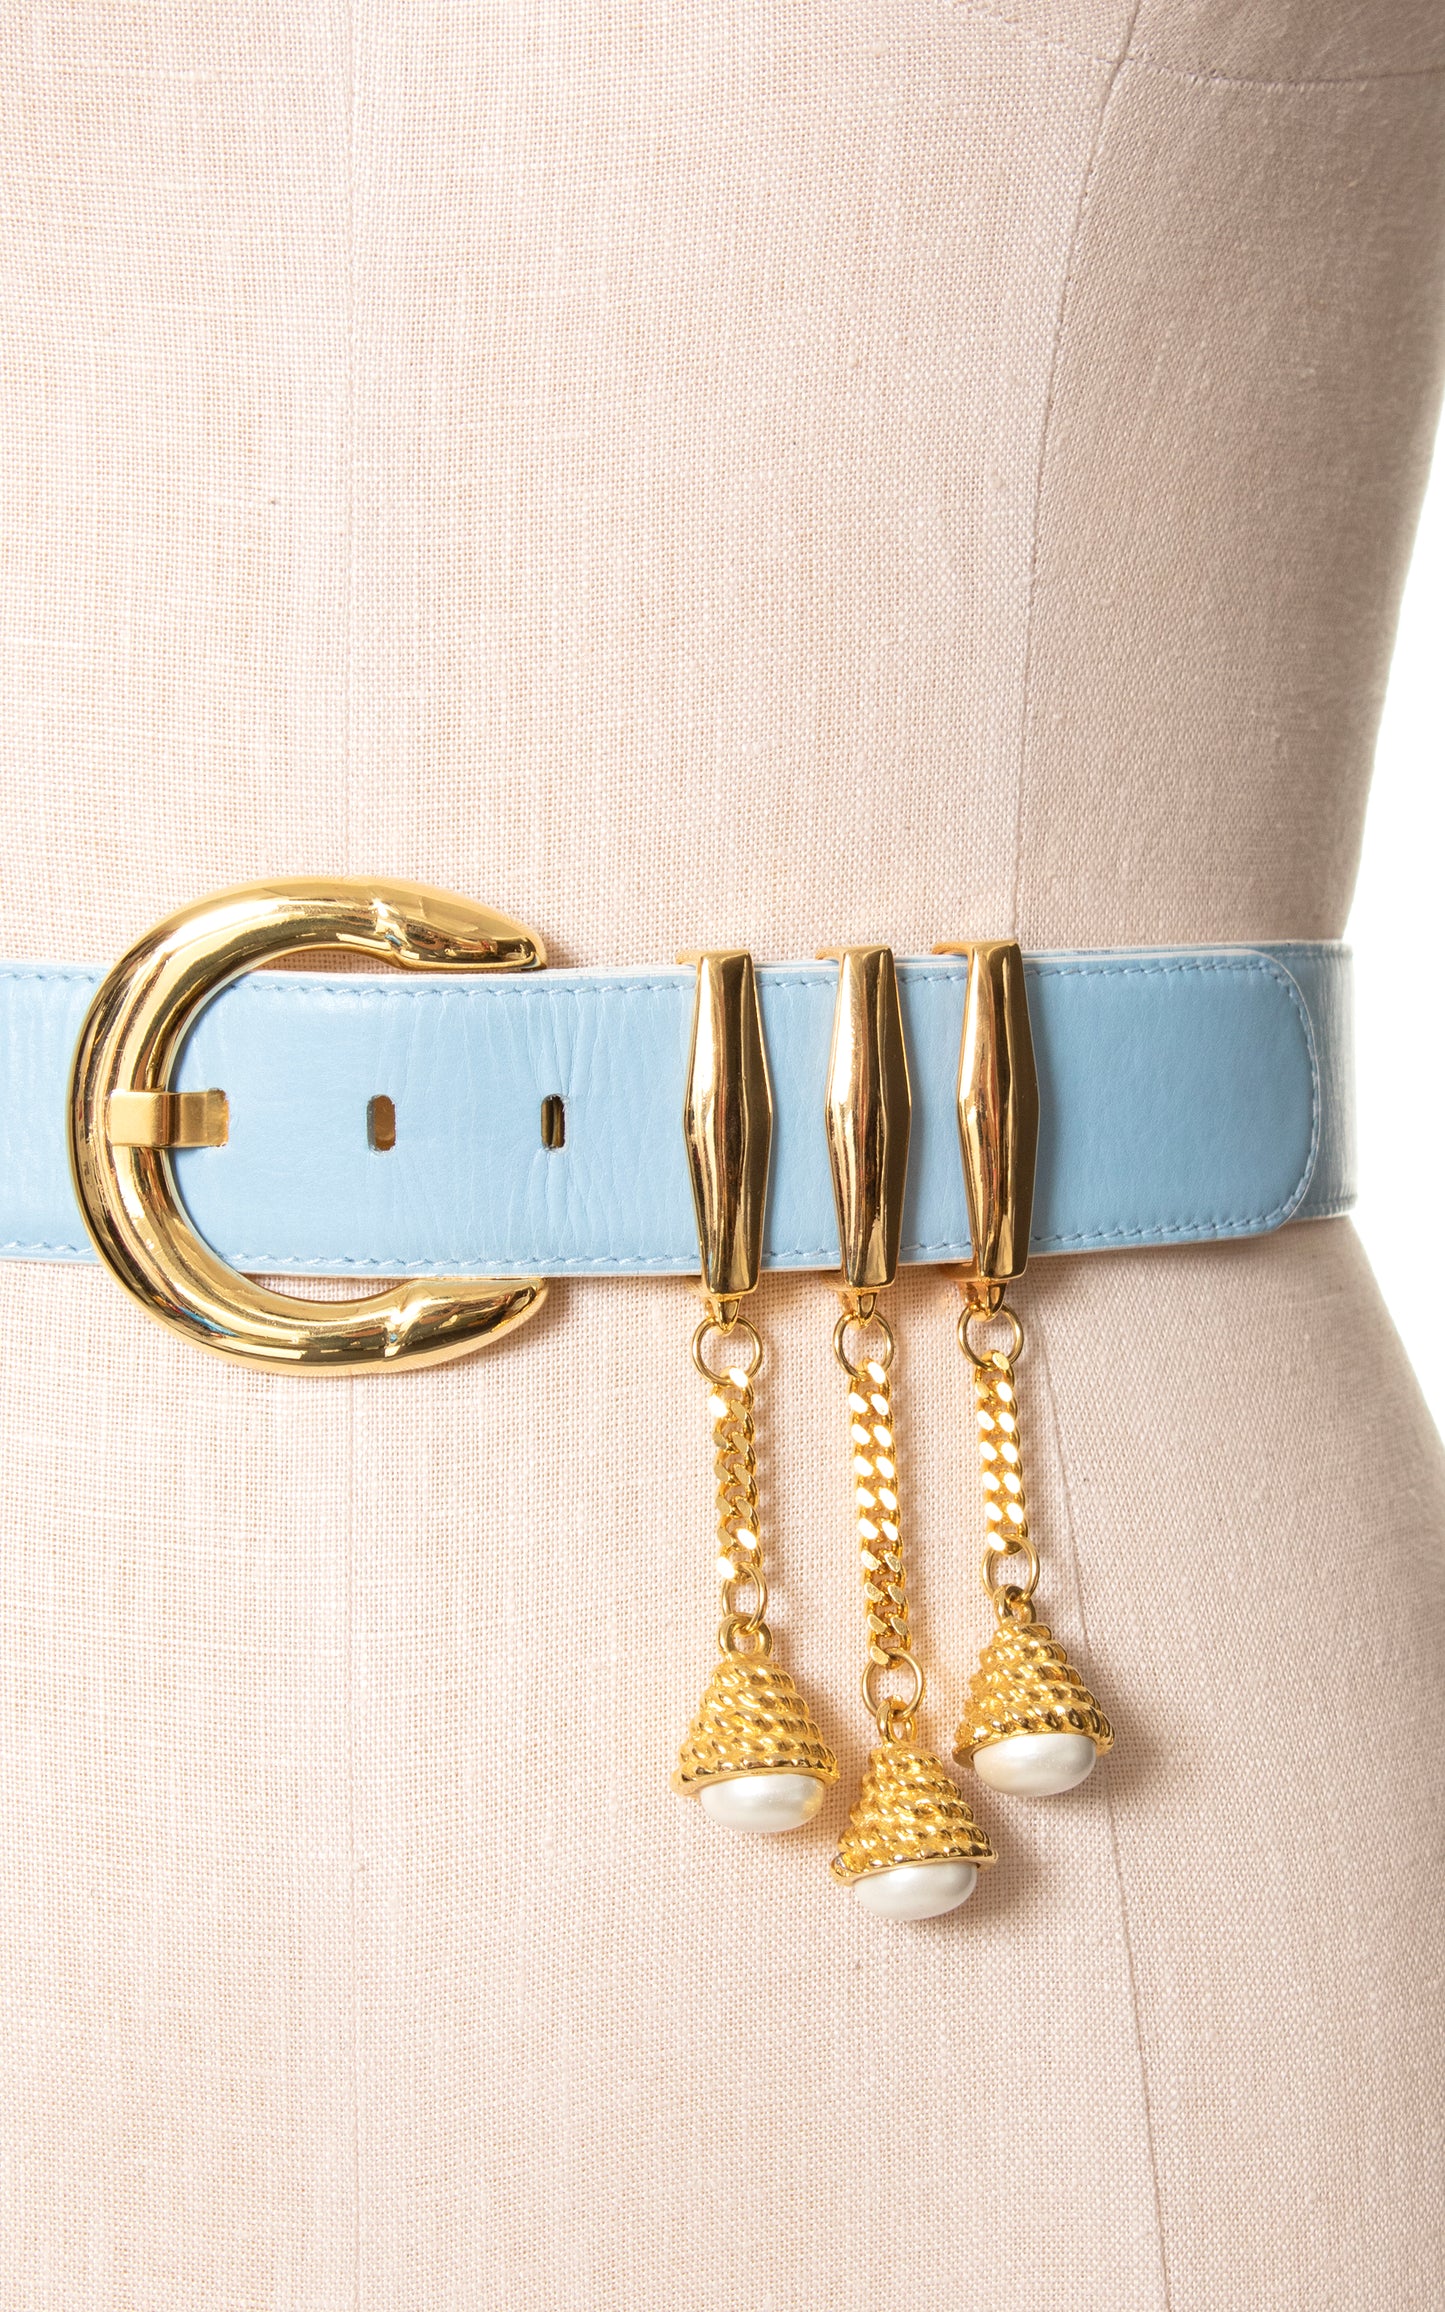 1980s ESCADA Blue Leather Cinch Belt with Charms | large